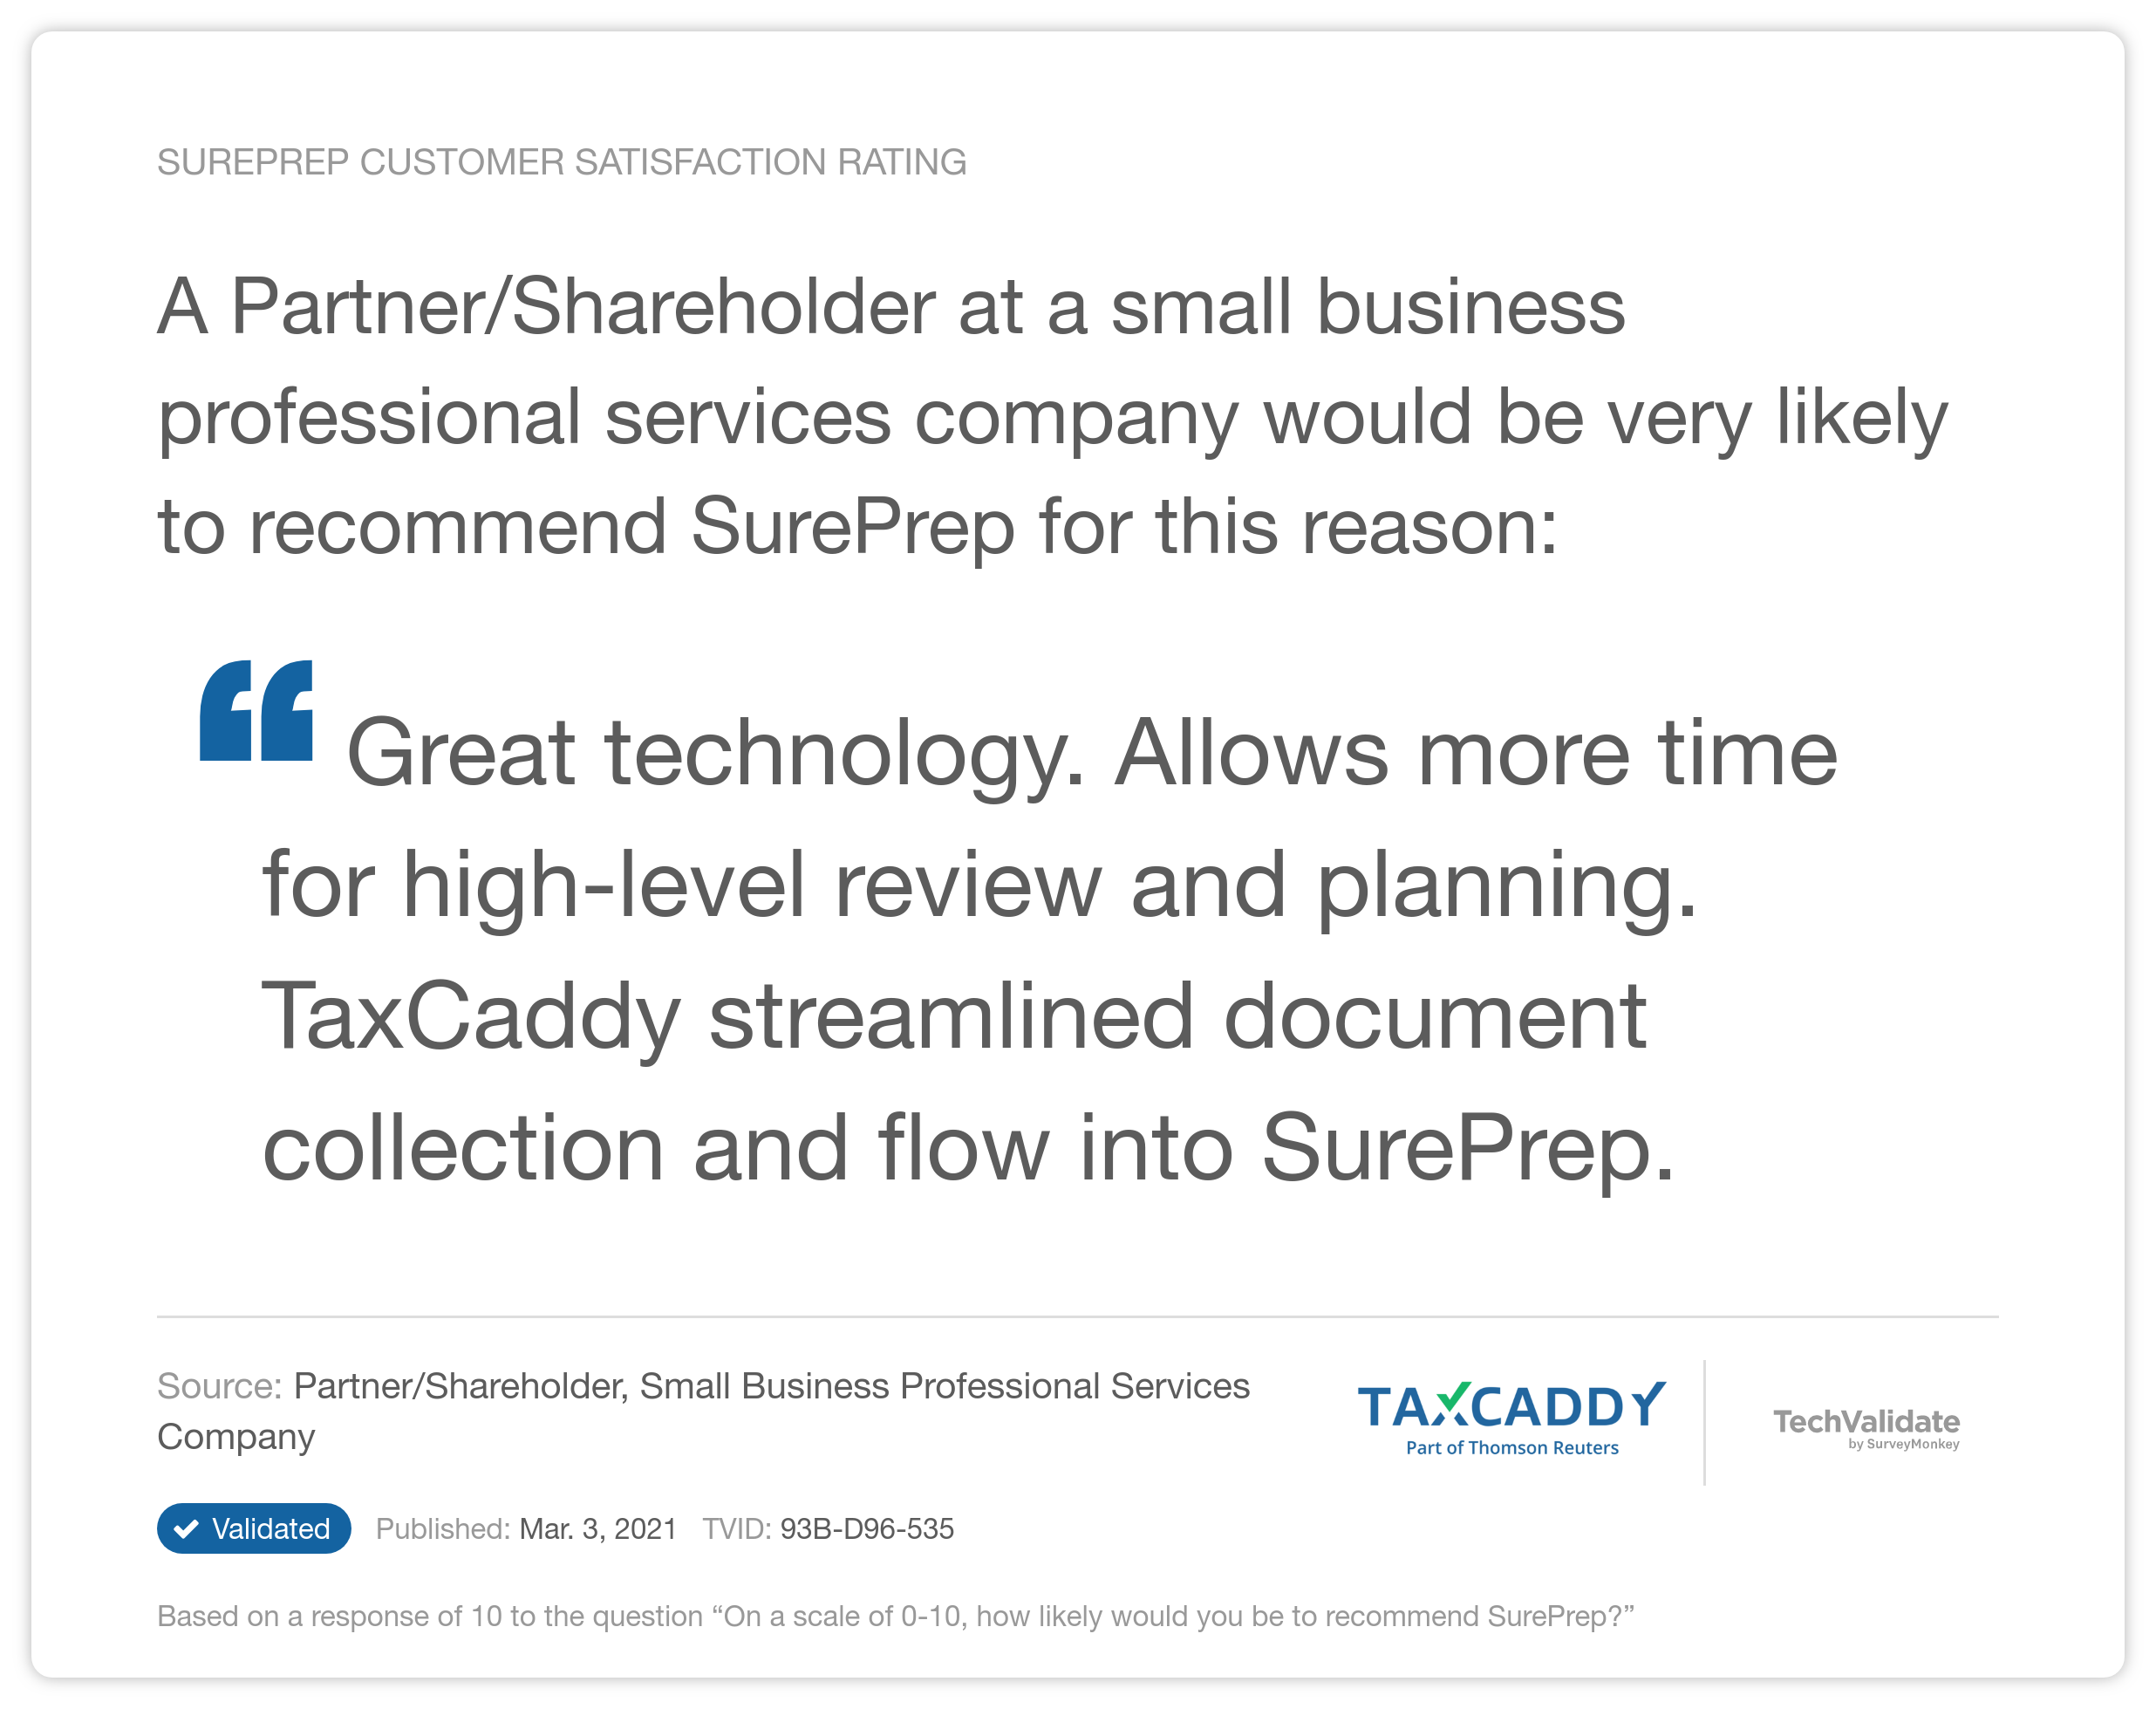 TaxCaddy TechValidate Tax Professional Quote 2